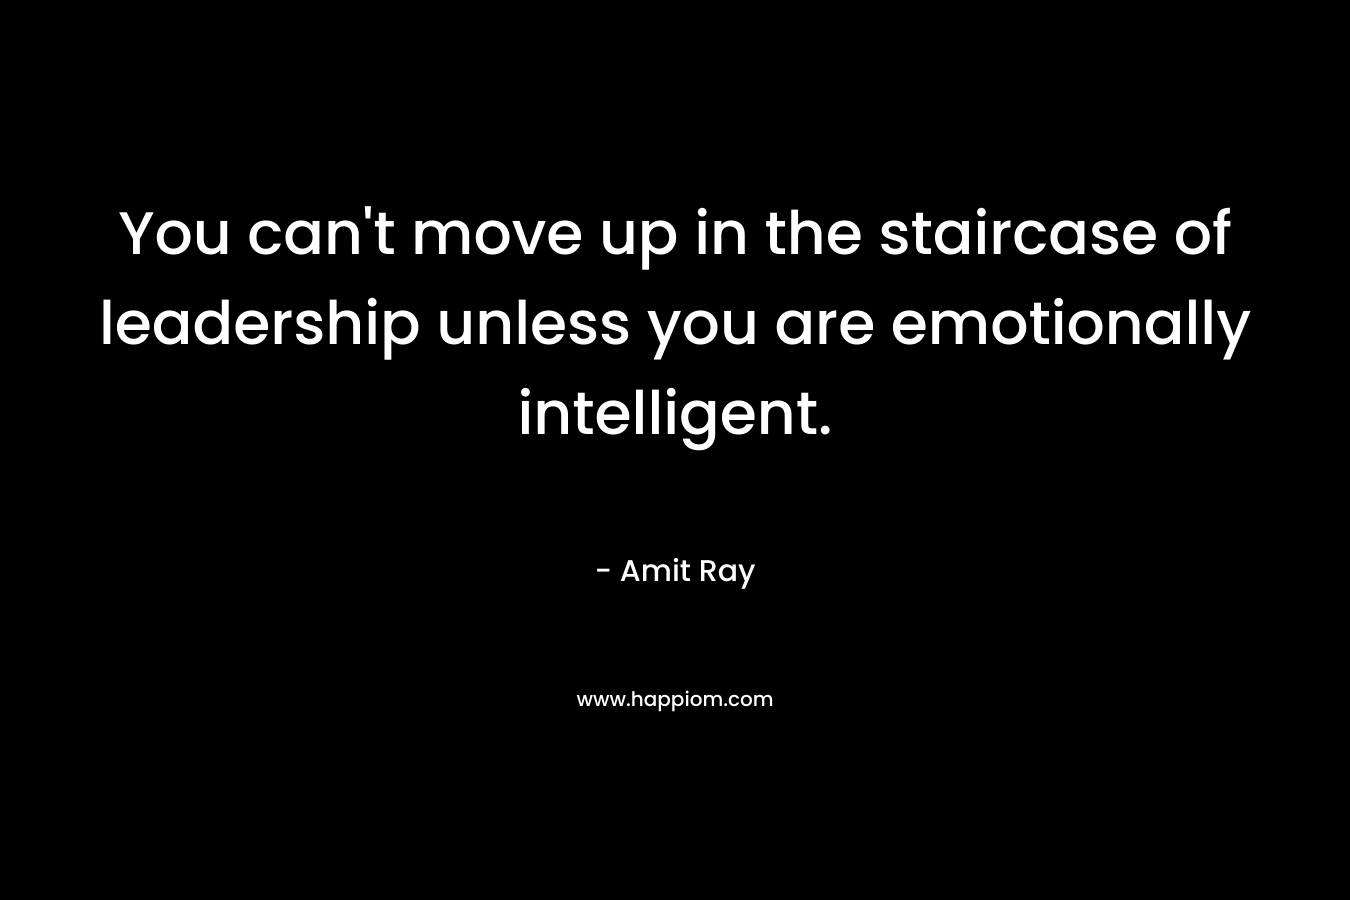 You can't move up in the staircase of leadership unless you are emotionally intelligent.